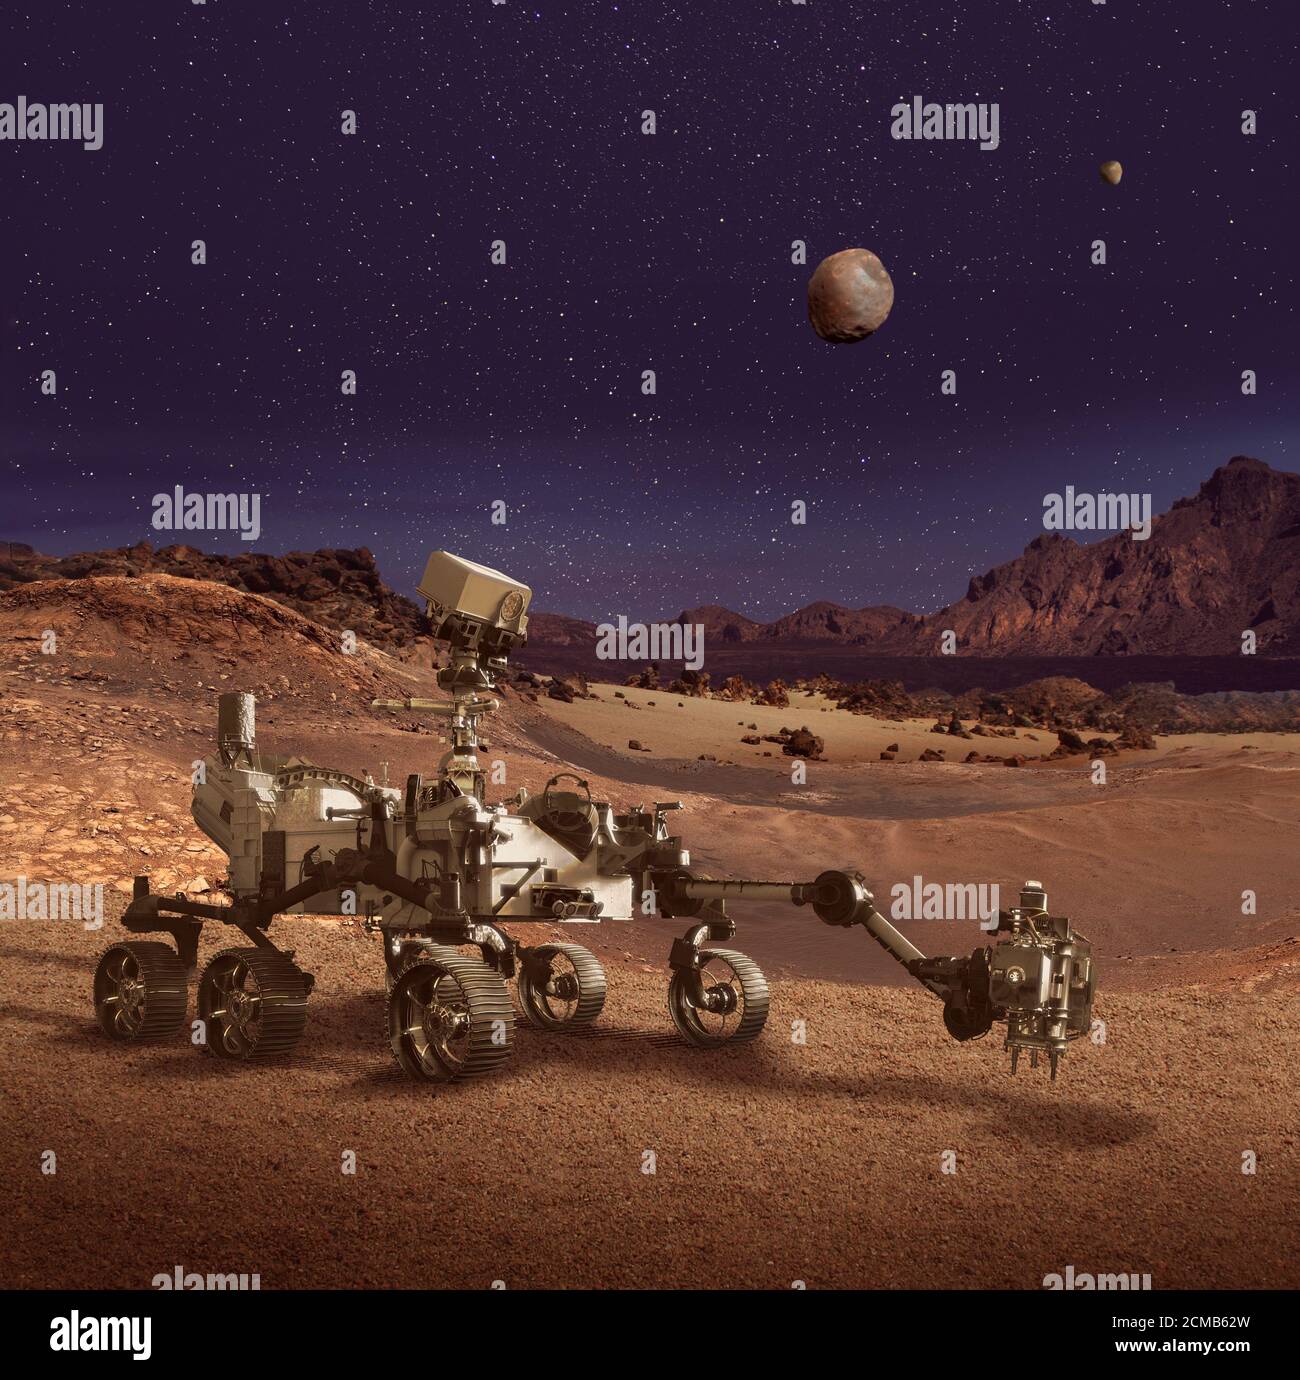 Illustration of Perseverance rover exploring the Planet Mars rocky landscape. Some elements furnished by NASA. Stock Photo